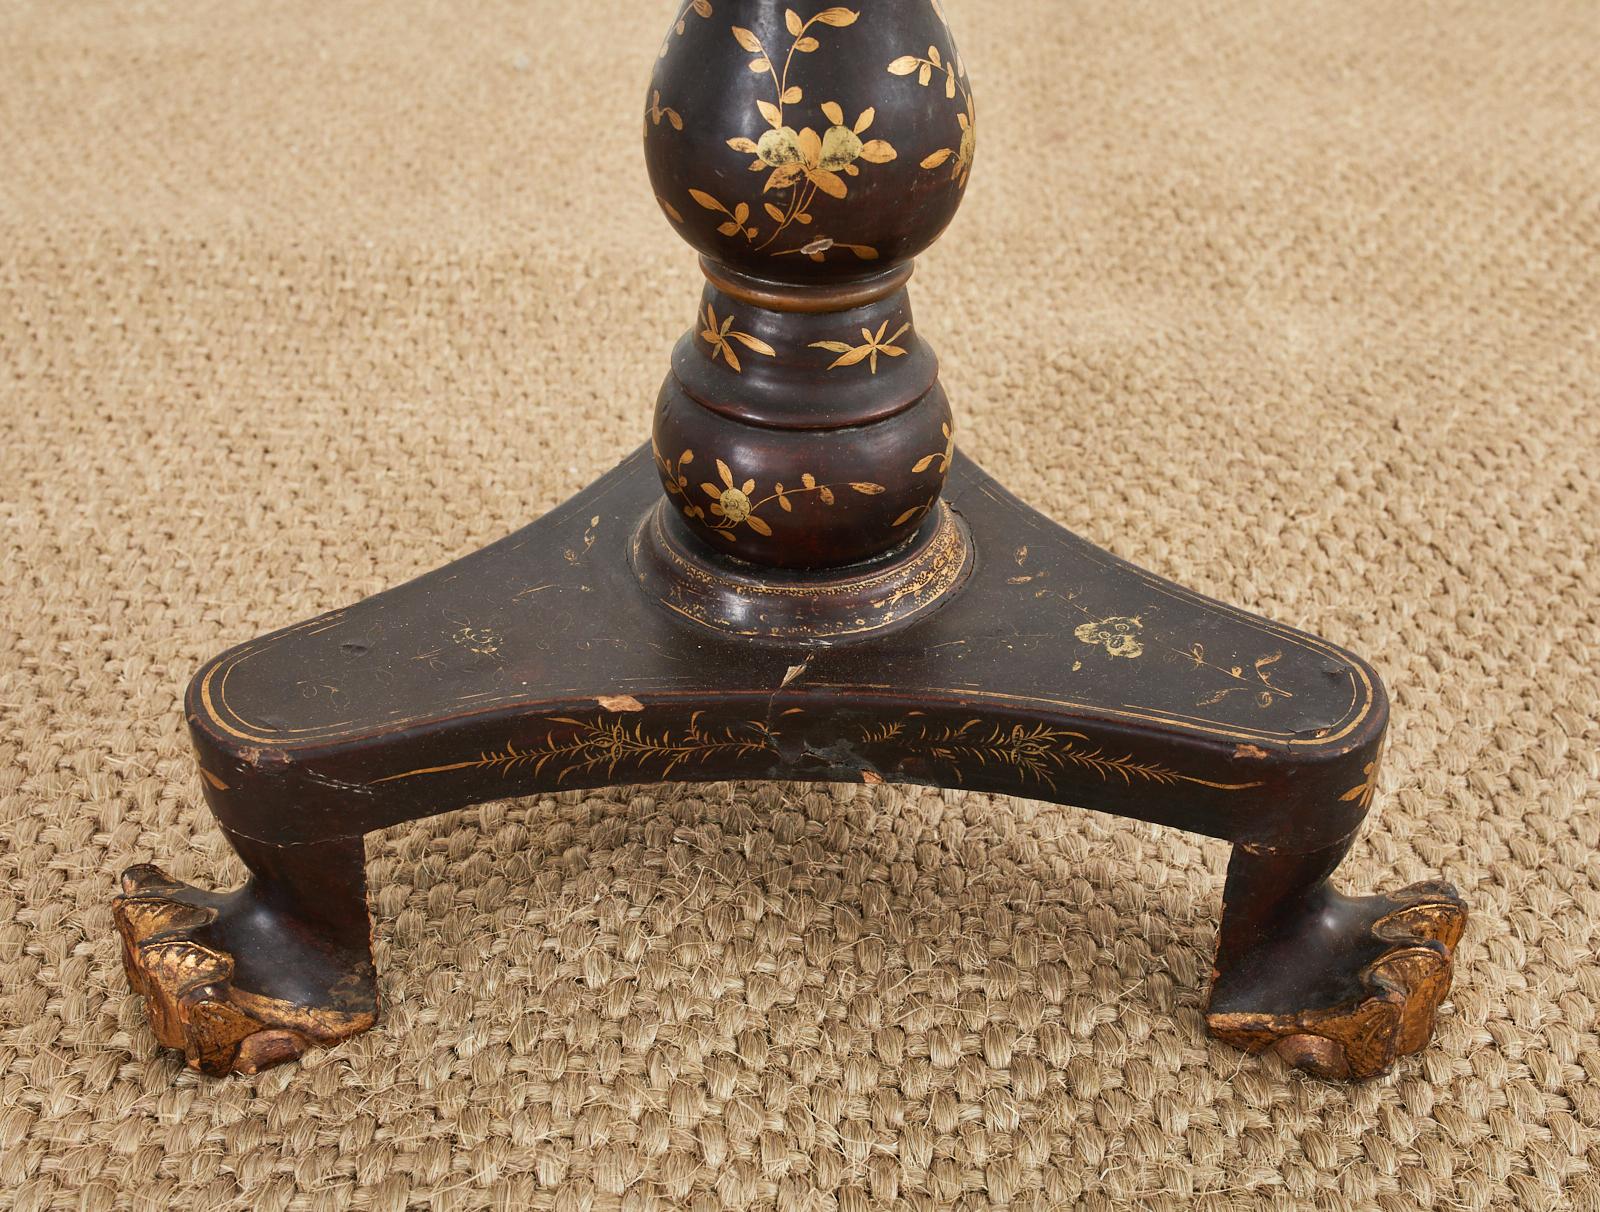 English Chinoiserie Tilt Top Pedestal Tripod Table In Distressed Condition For Sale In Rio Vista, CA